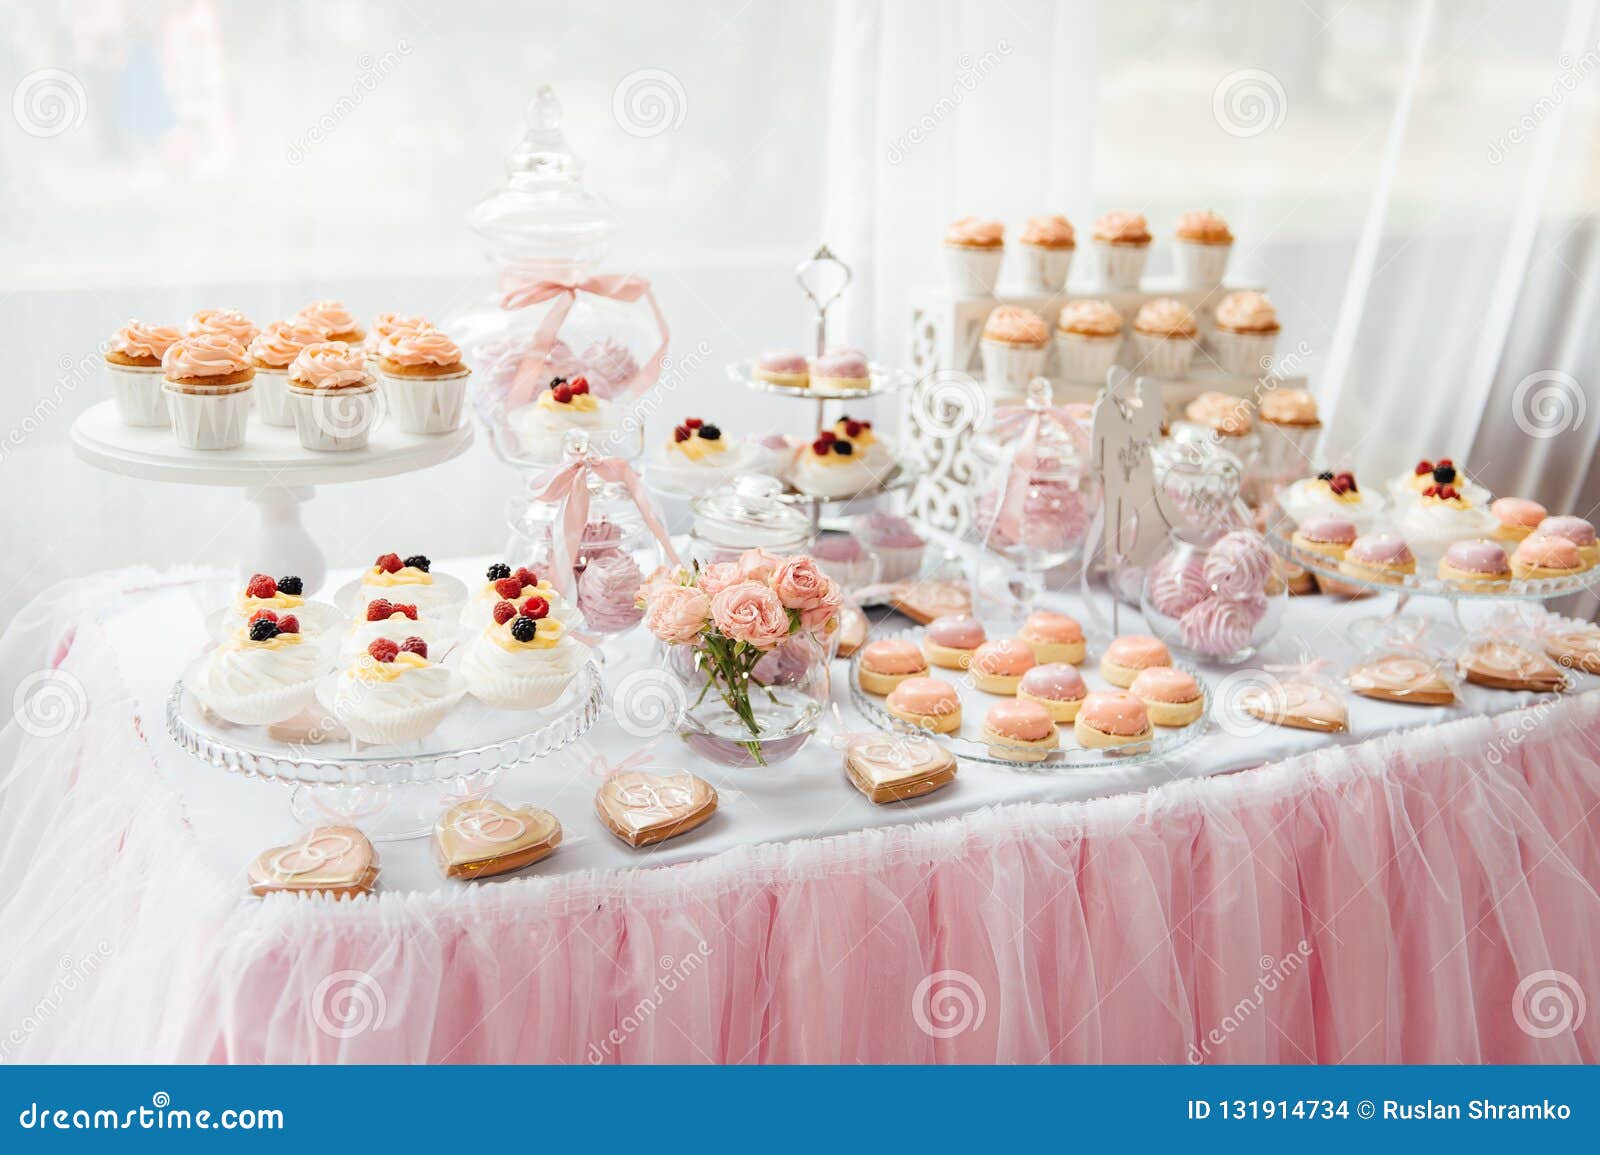 Kids Birthday Party Decoration And Cake Decorated Table Stock Photo Image Of Cupcake